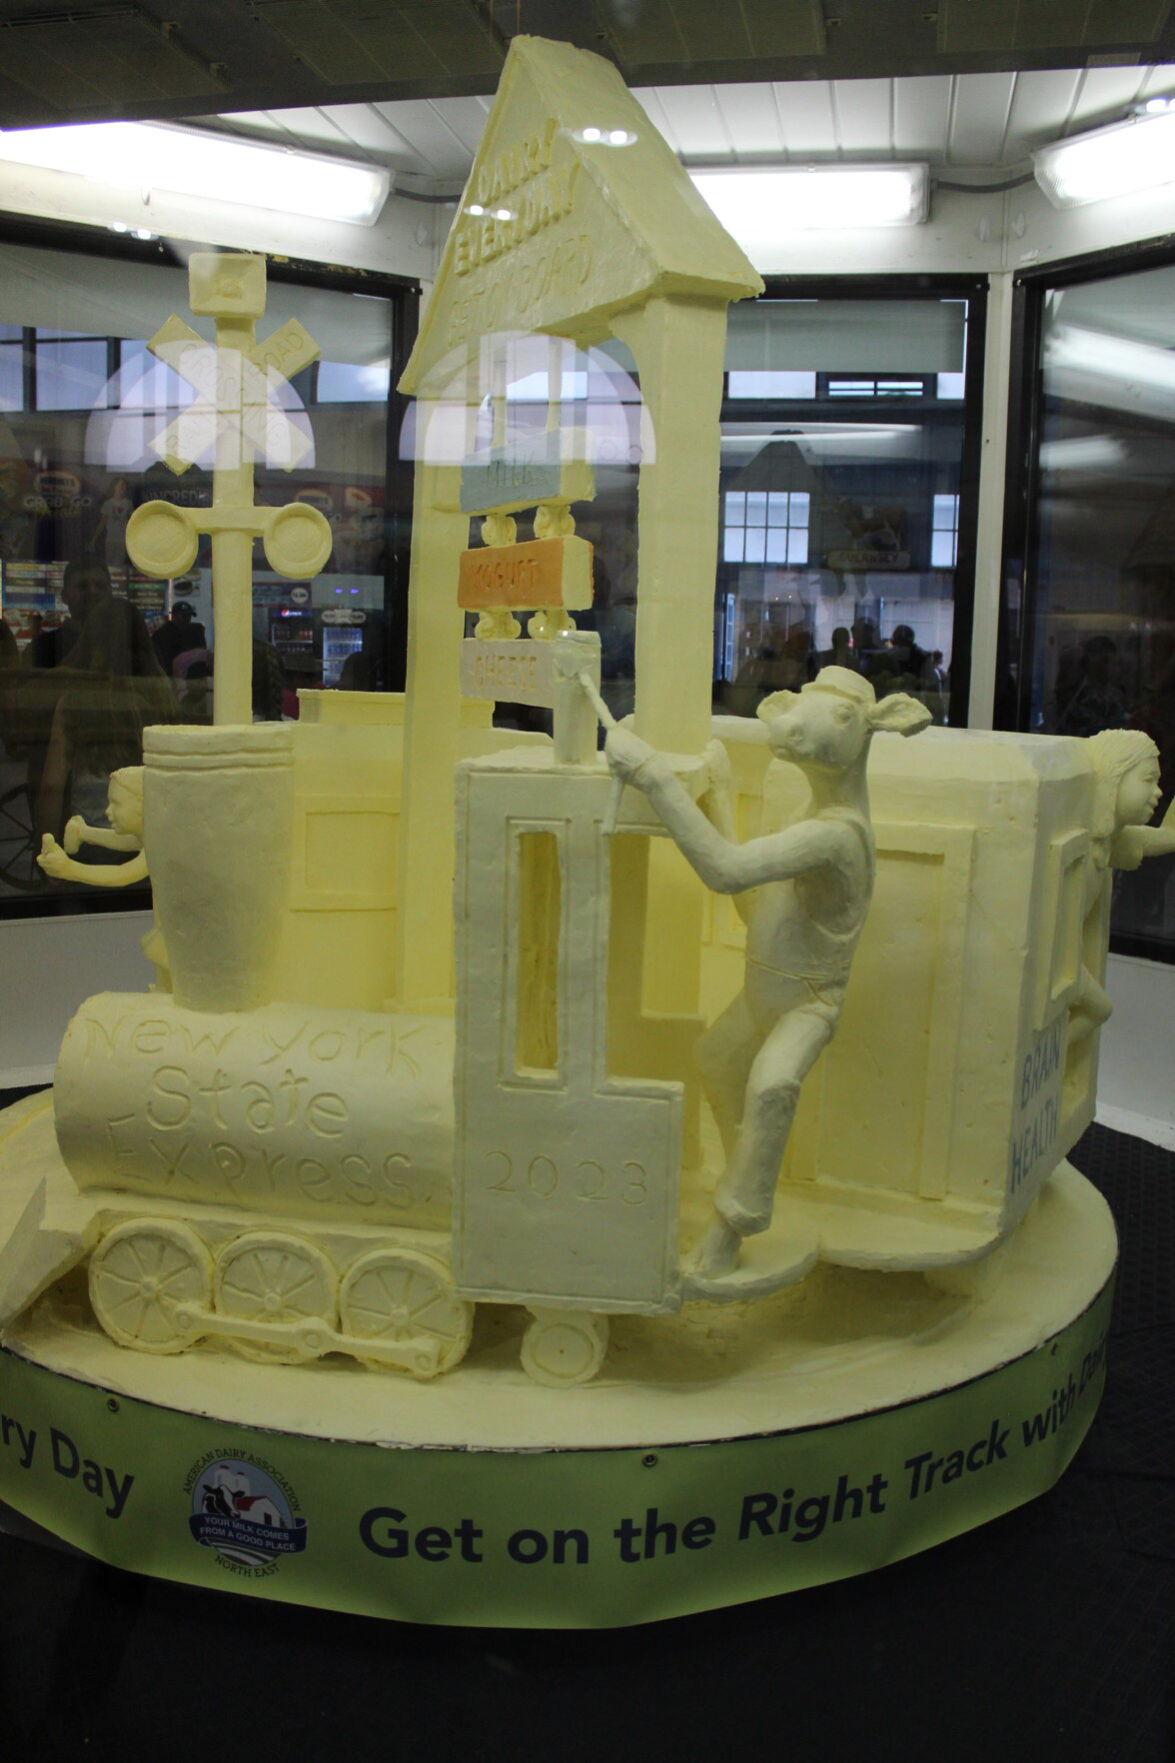 2023 NYS Fair butter sculpture: See this year's creation